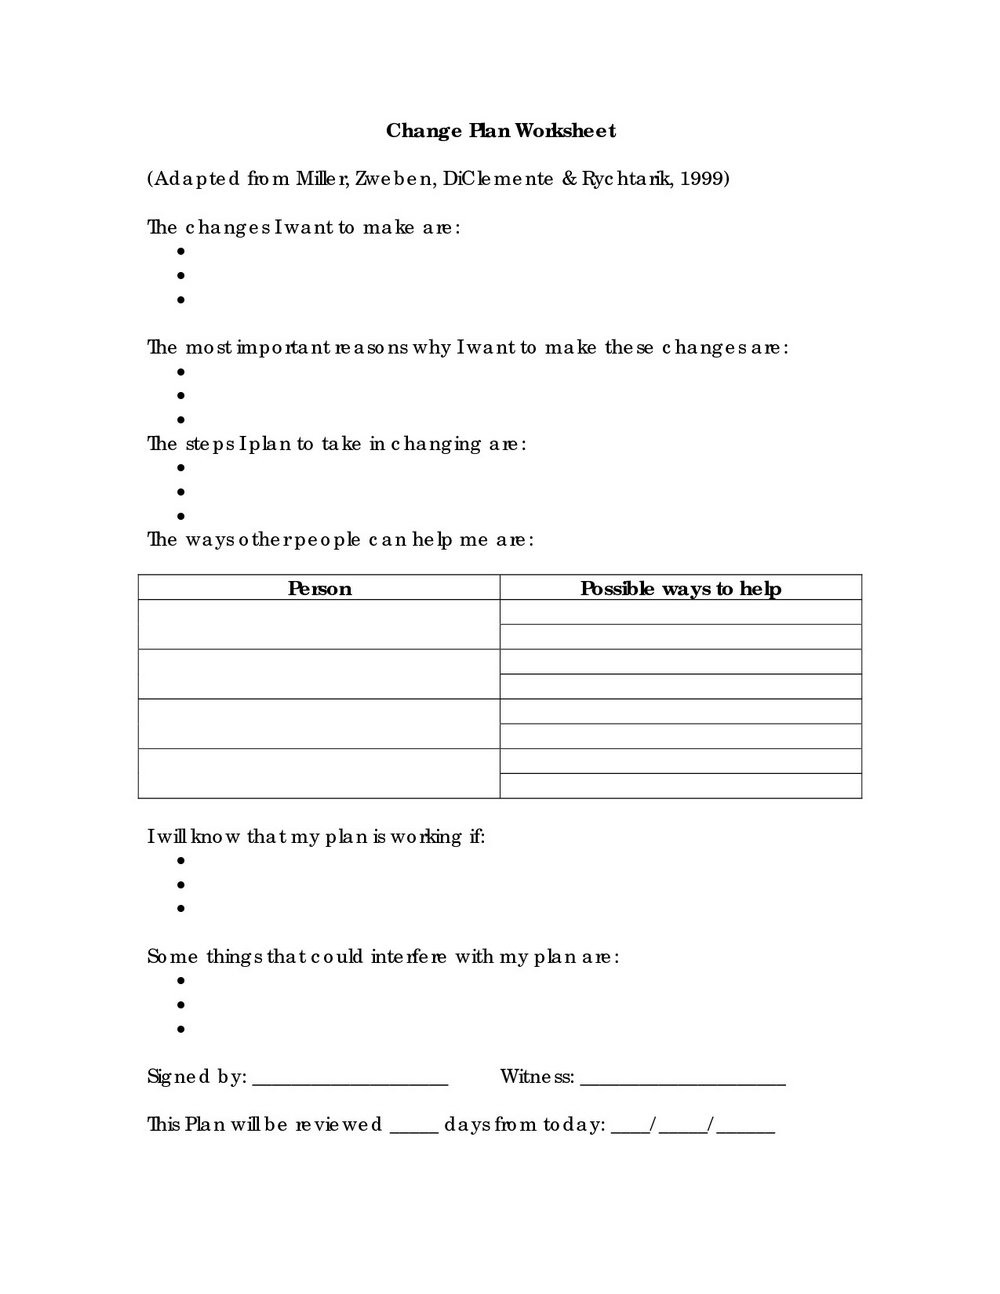 substance abuse worksheets for adults pdf db excelcom